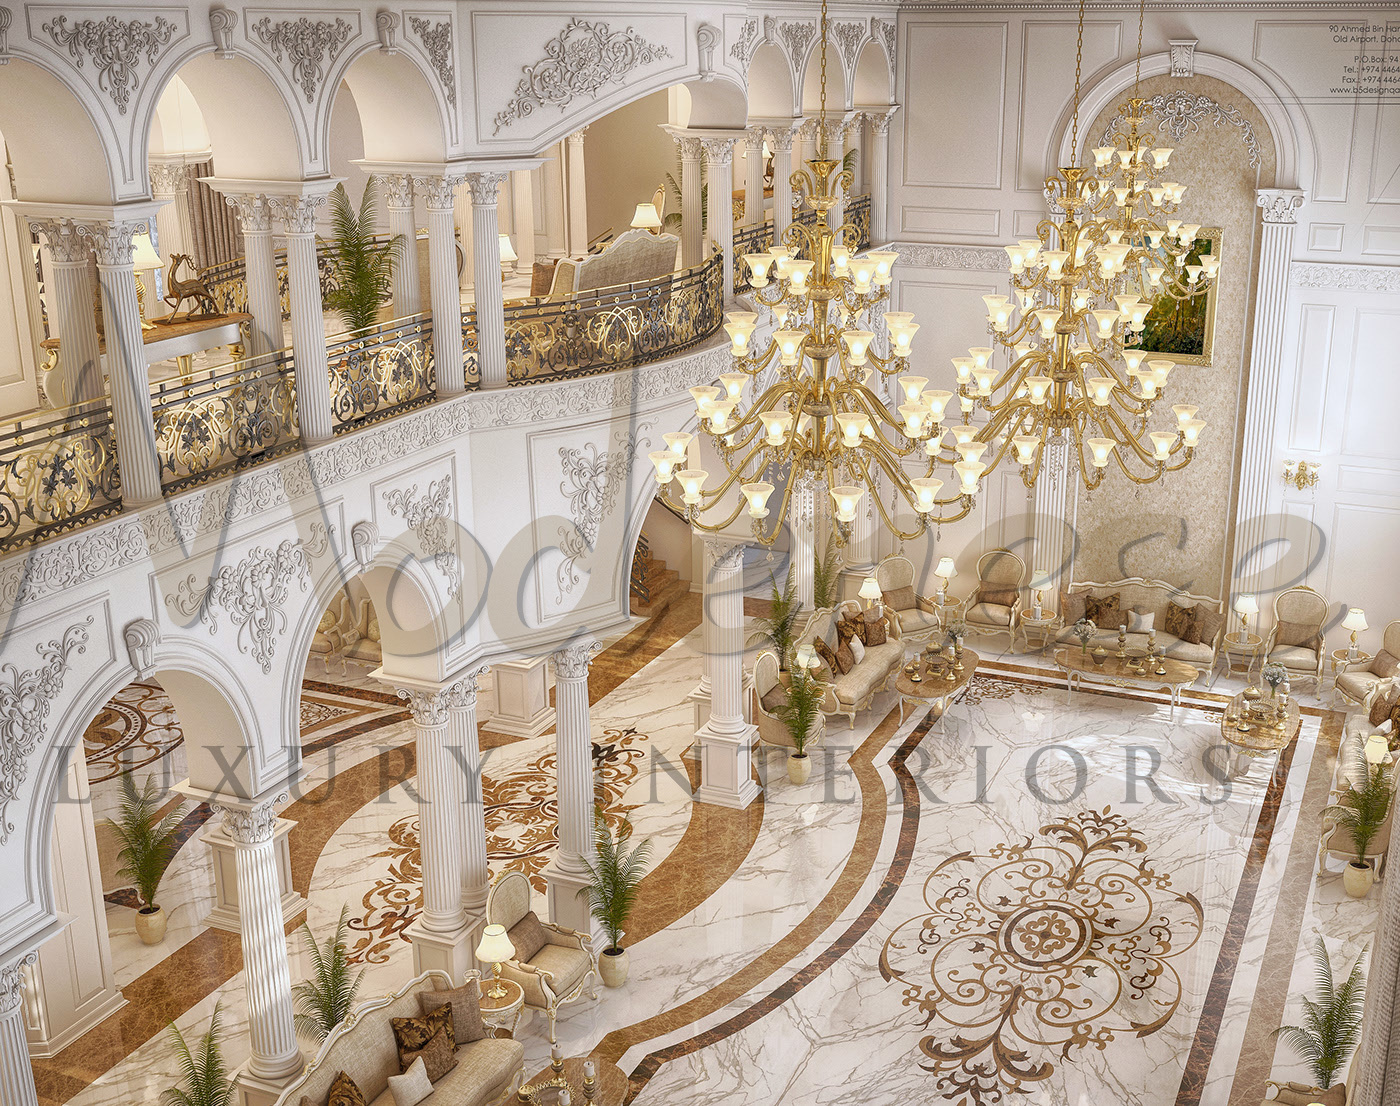 Luxurious classic interior design highlights the beauty of grandiose elements in an exquisite house in Mecca, Saudi Arabia.